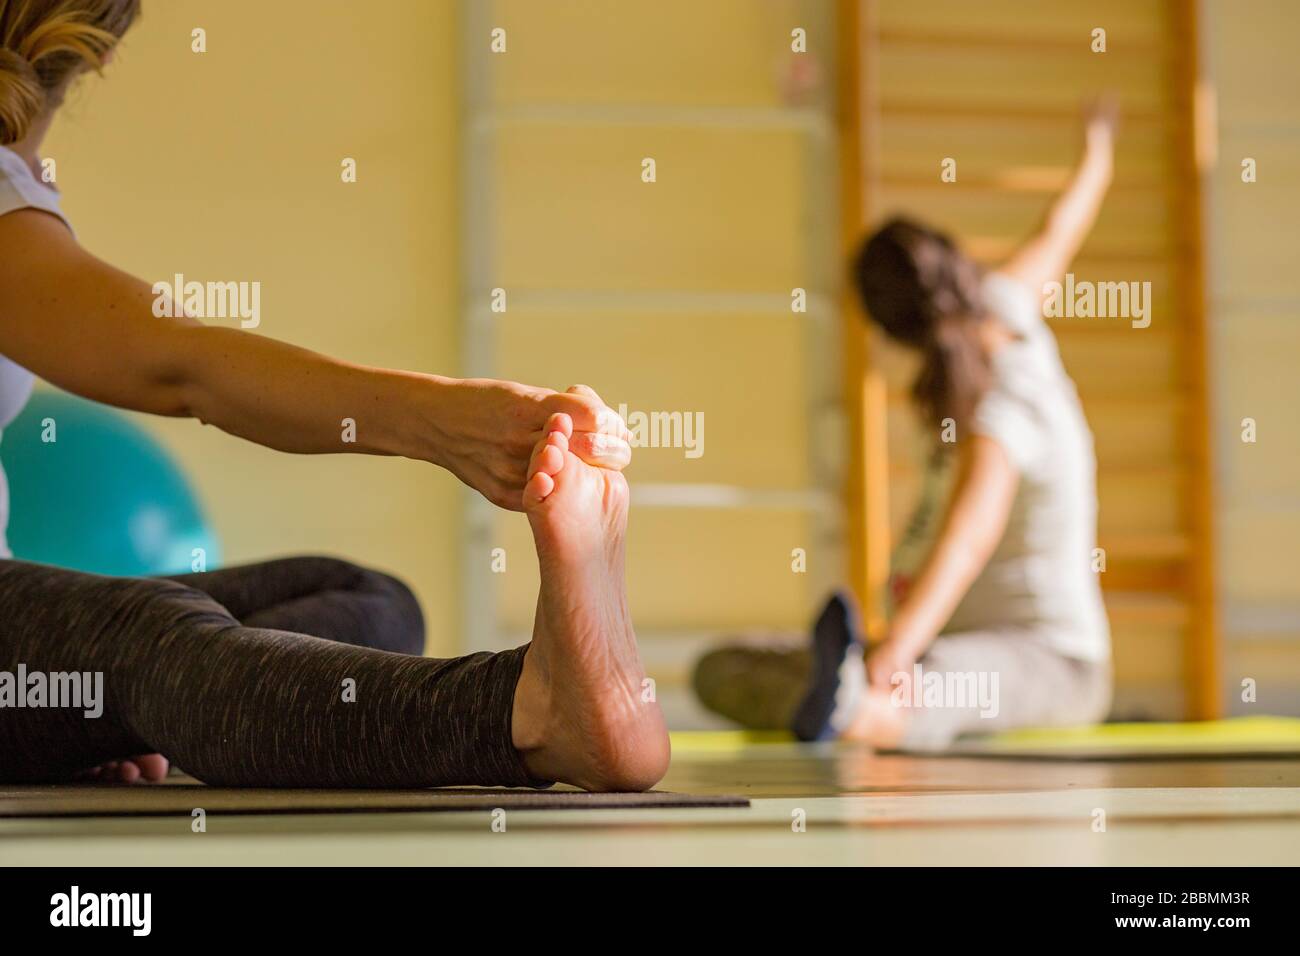 Stretching at a prenatal yoga practice session Stock Photo